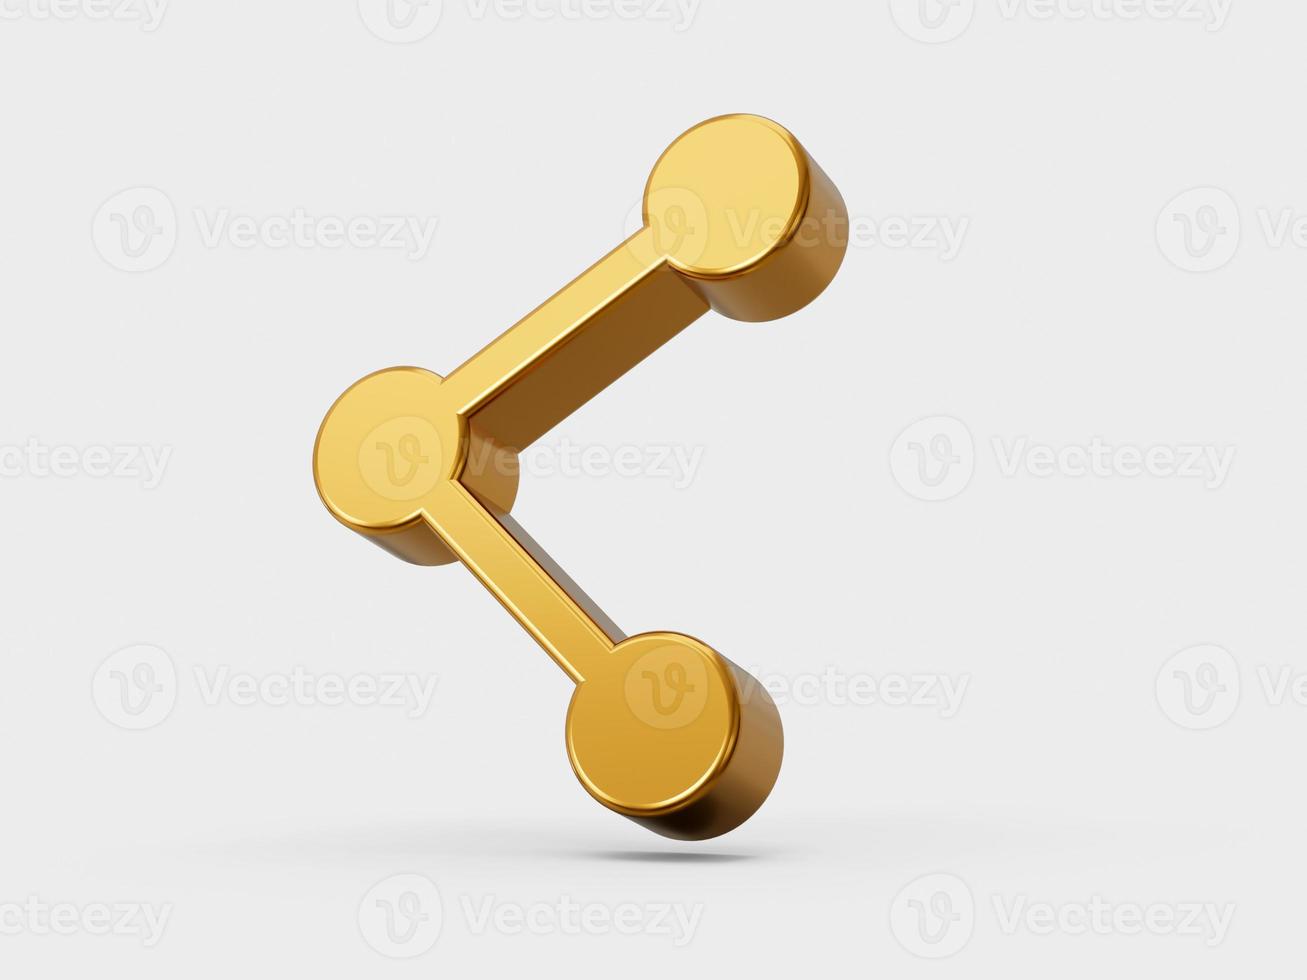 Golden share link icon button symbol isolated on Isolated background 3D illustration photo